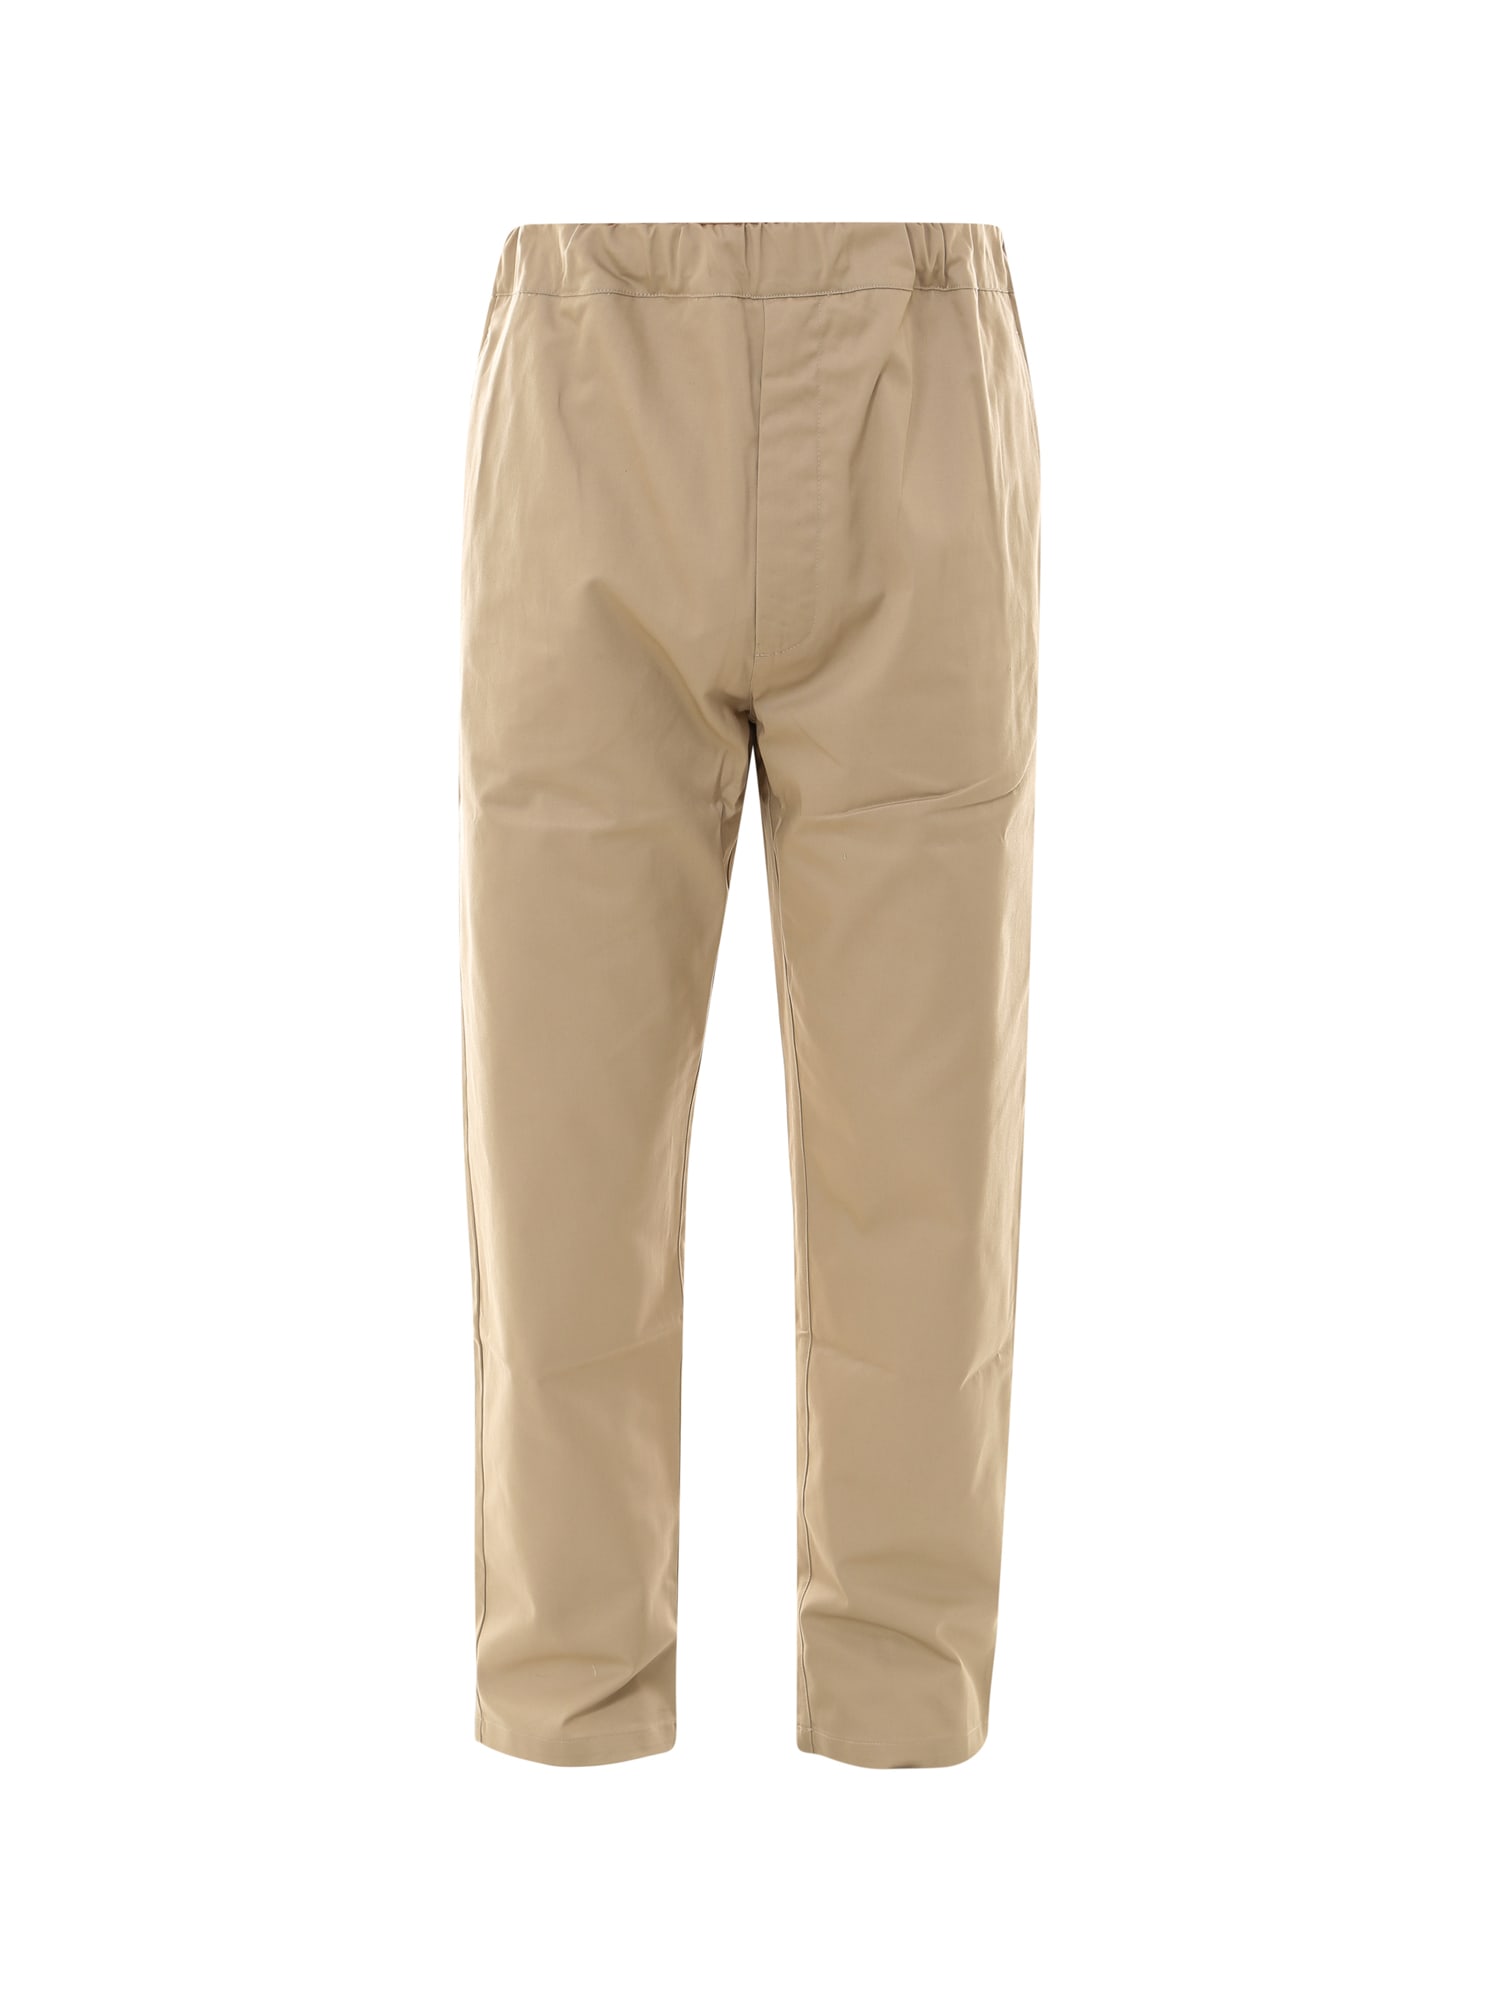 The Silted Company Cotton Trouser - Atterley In Beige